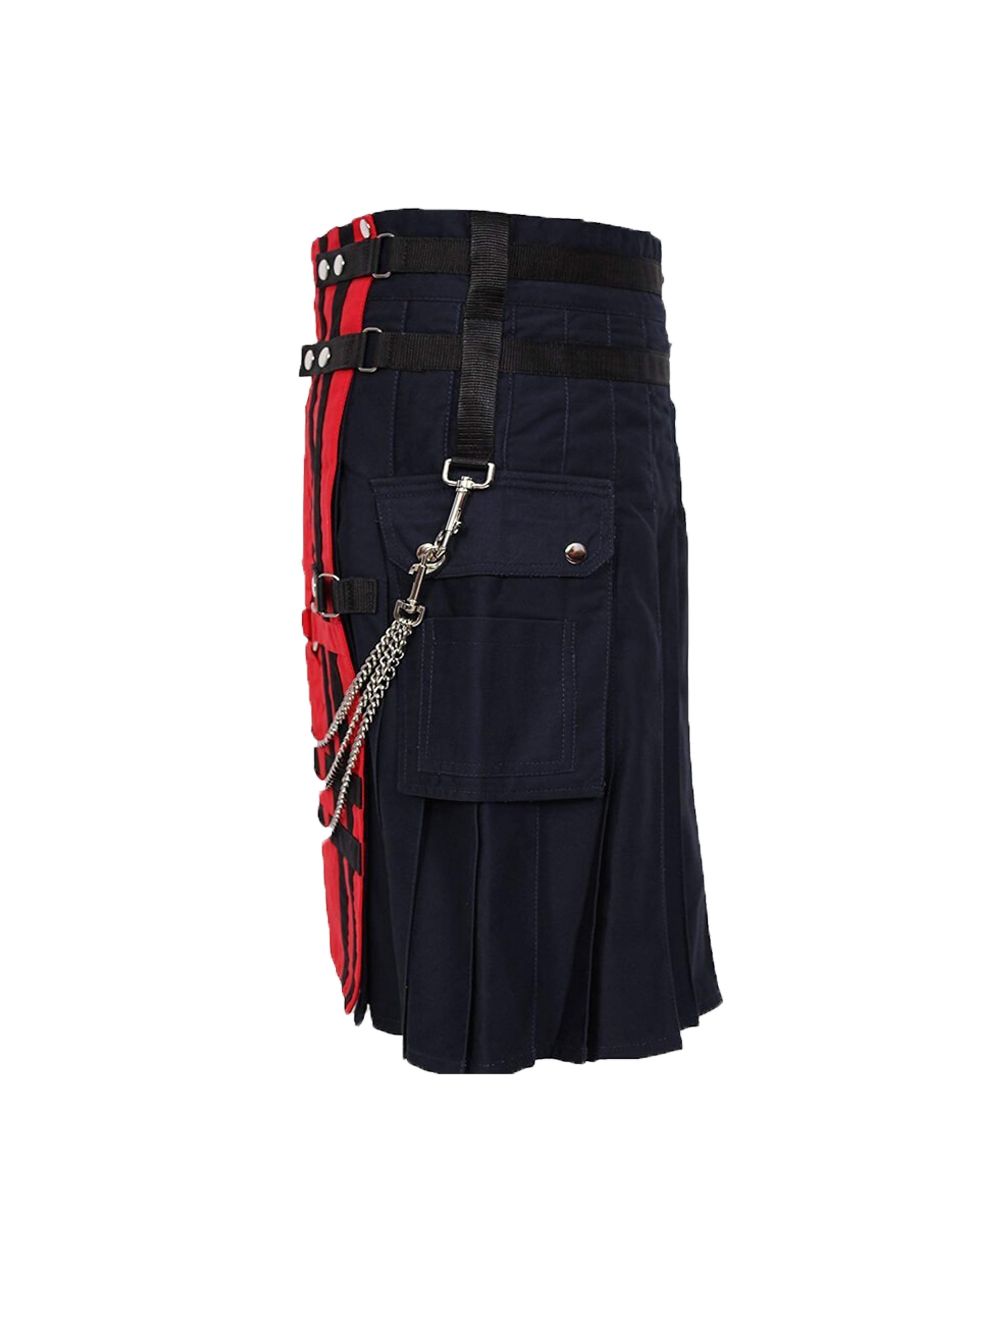 Red Gothic Style Fashion Kilt With Chains